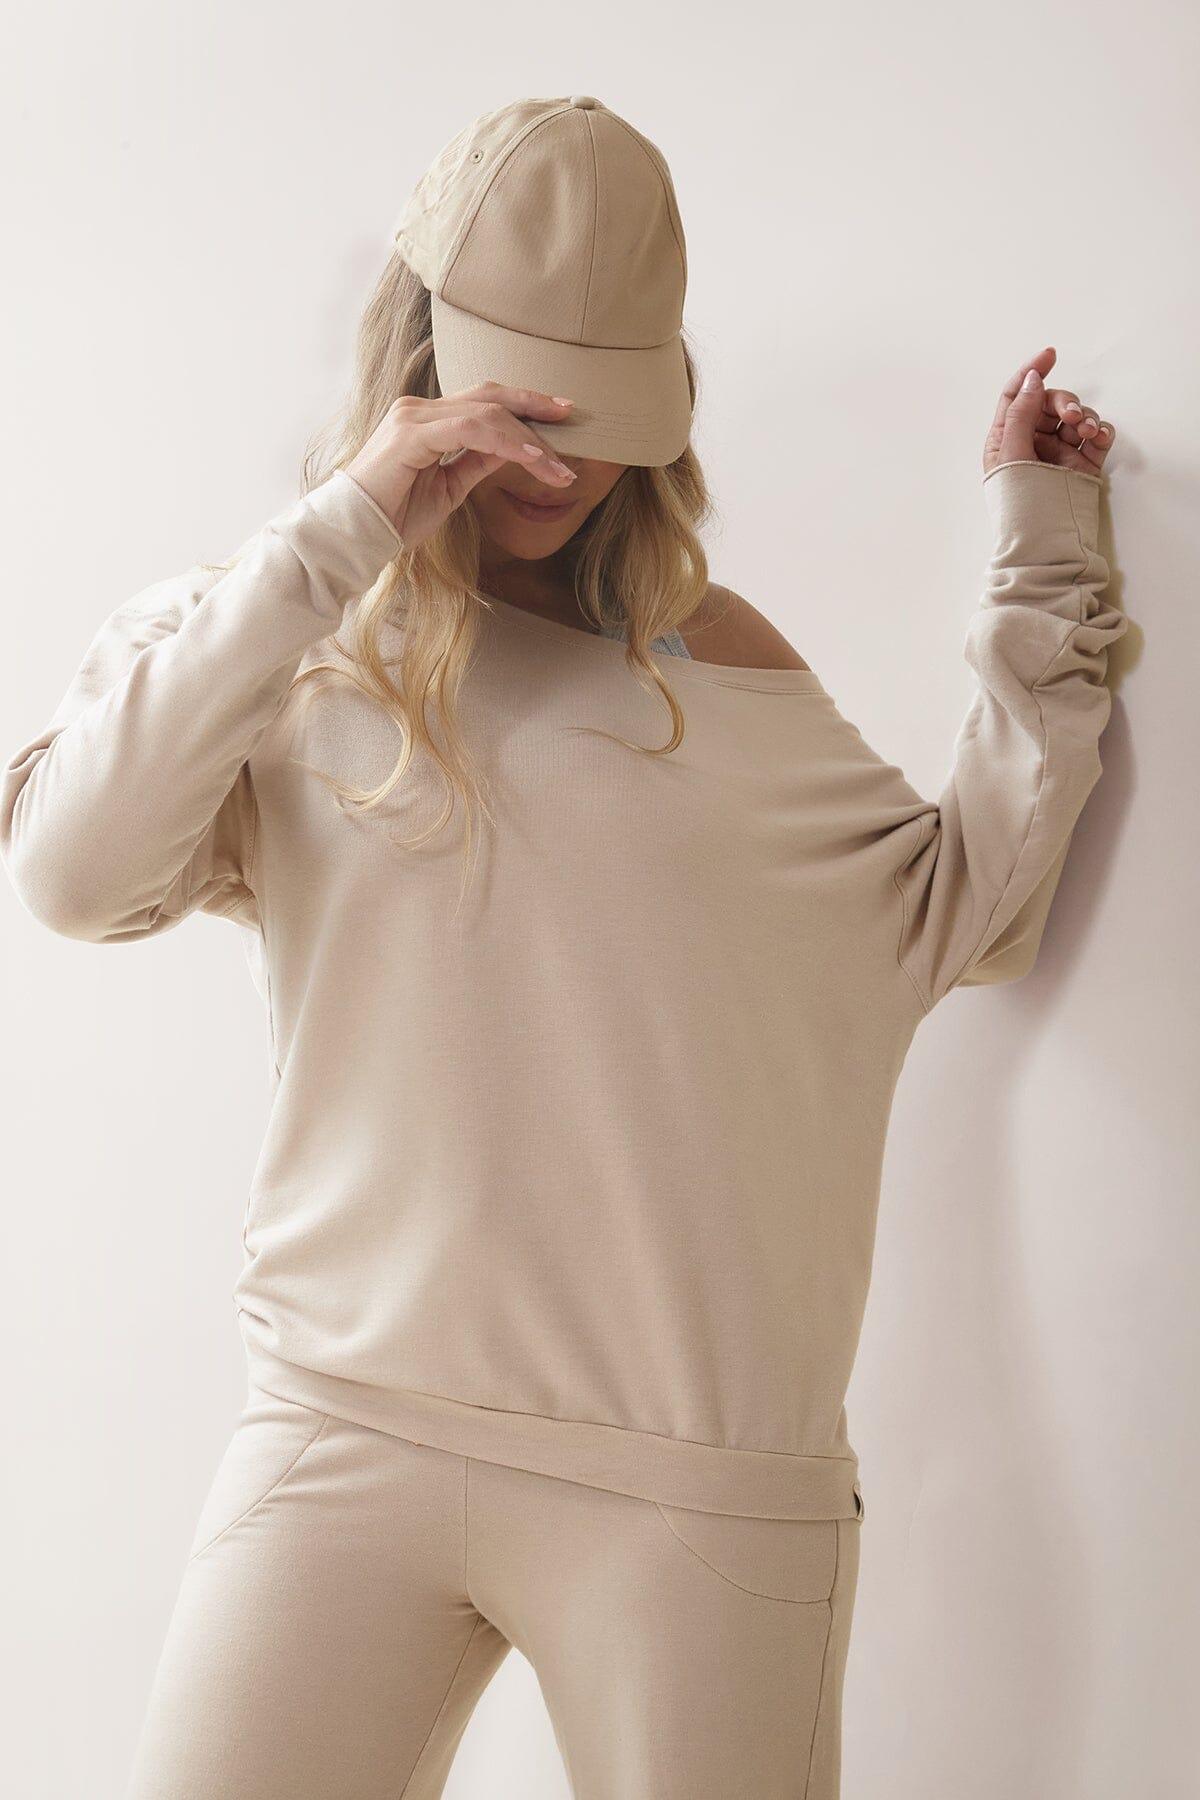 Femme qui porte le chandail Flashdance de Rose Boreal./ Women wearing the Flashdance pullover from Rose Boreal. - Sand Beige